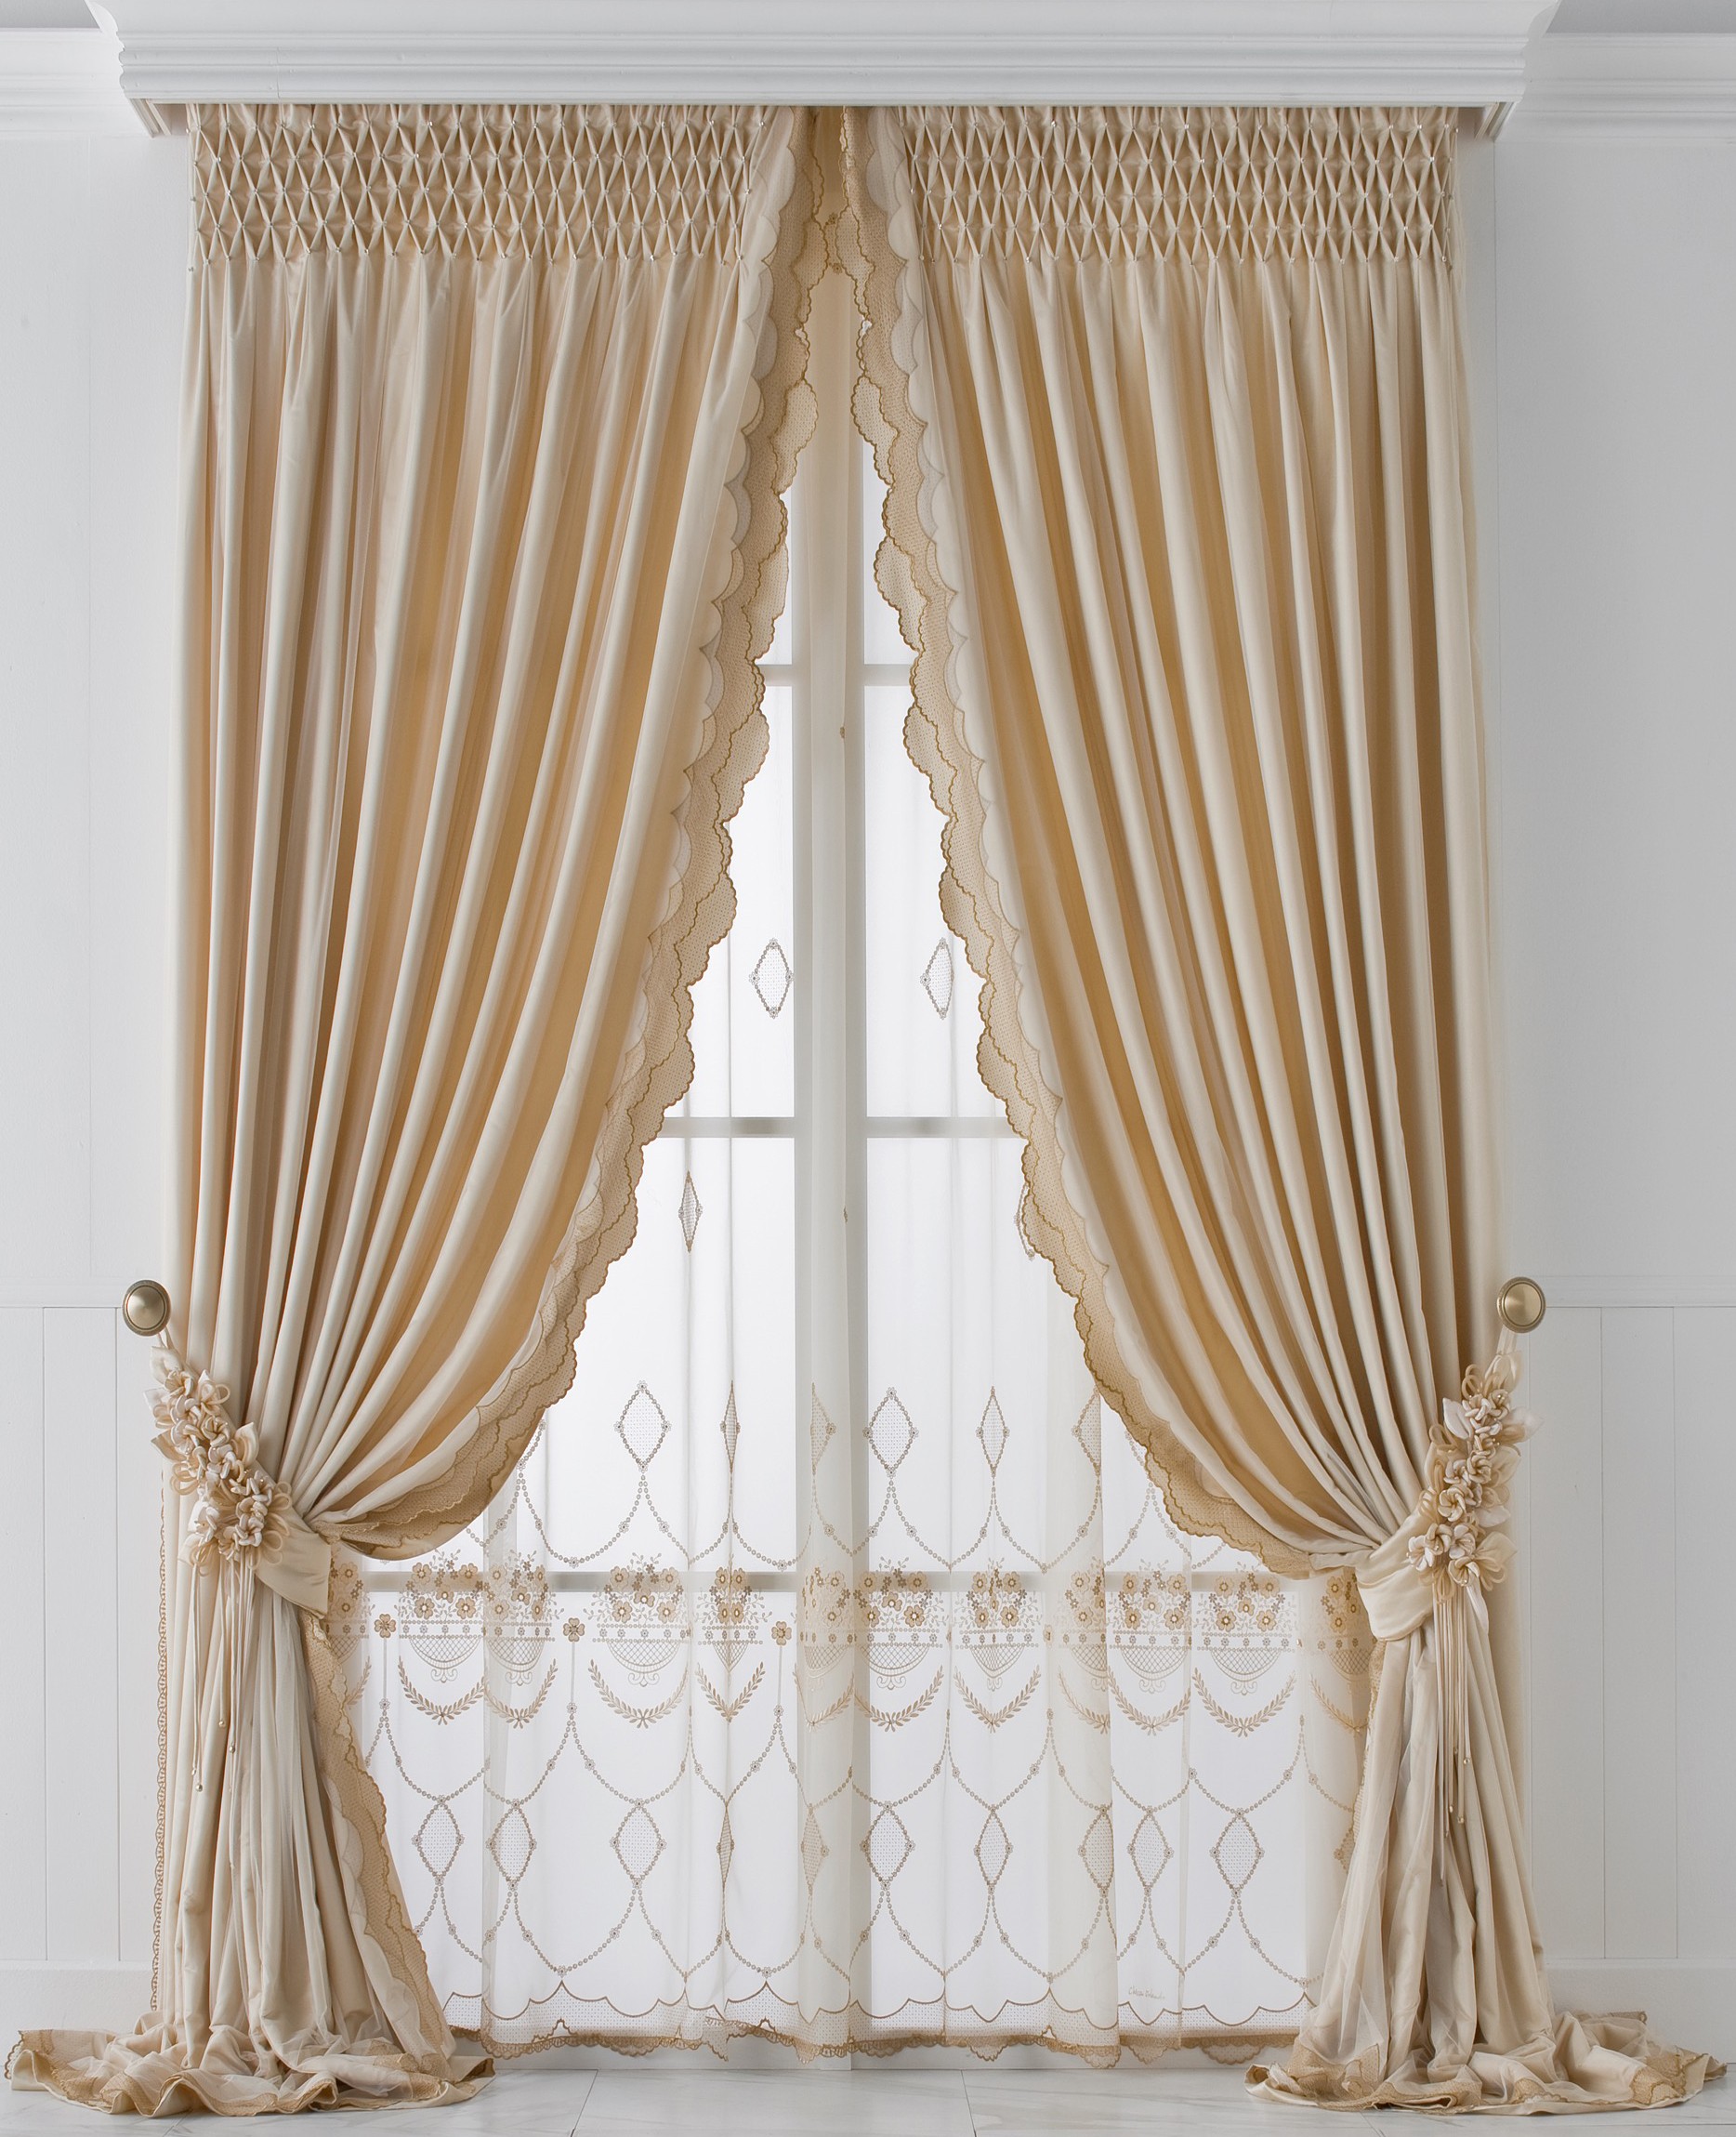 Custom Window Treatments Hand made draperies from our Masterpiece Collection. 62